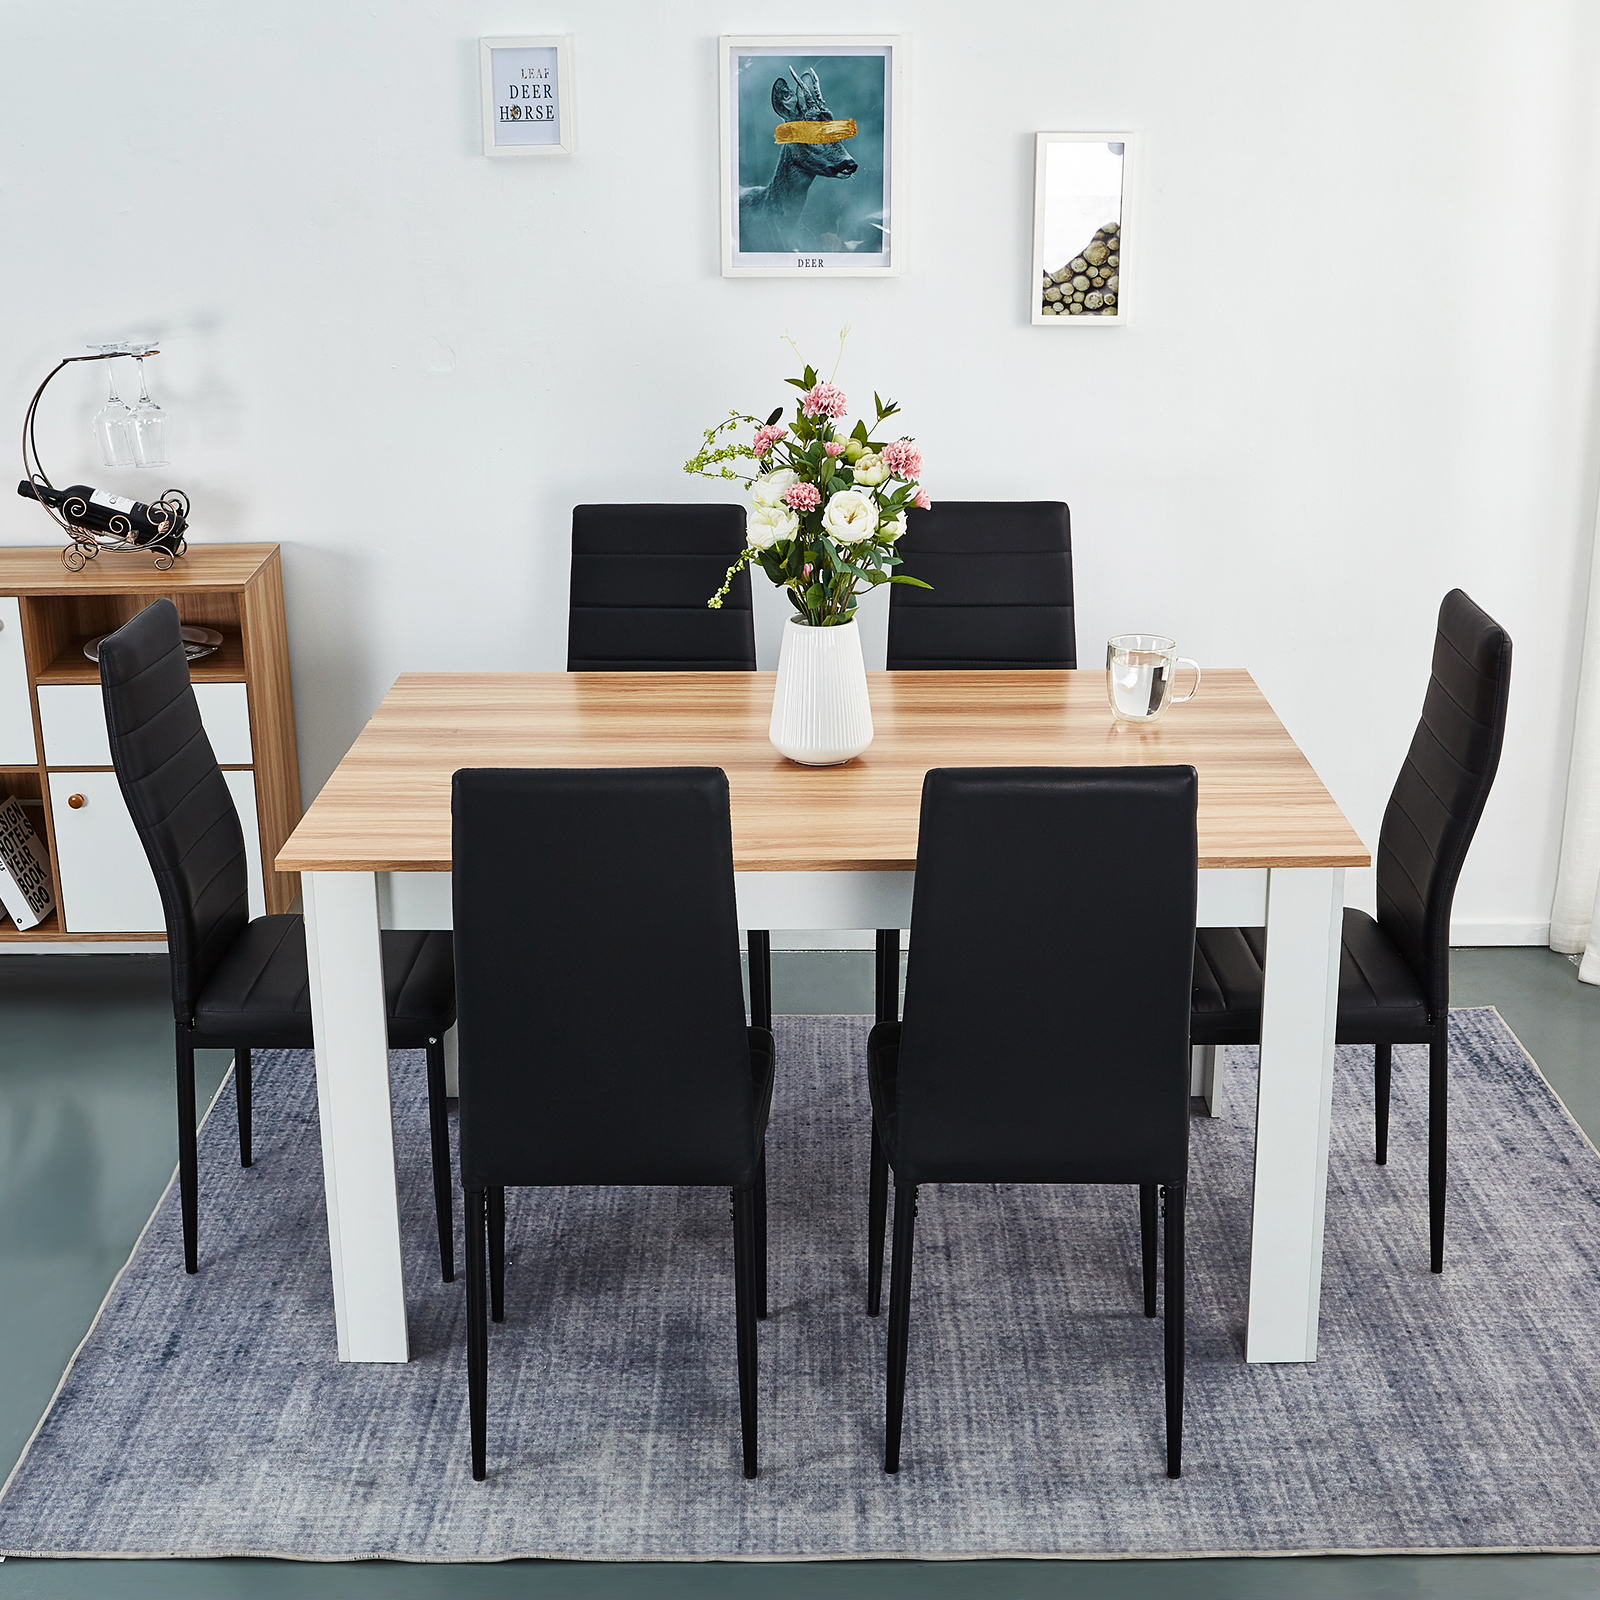 KOSY KOALA White and black wood dining Table with 6 black Faux Leather chairs high gloss wood dining set Table and 6 black chairs 